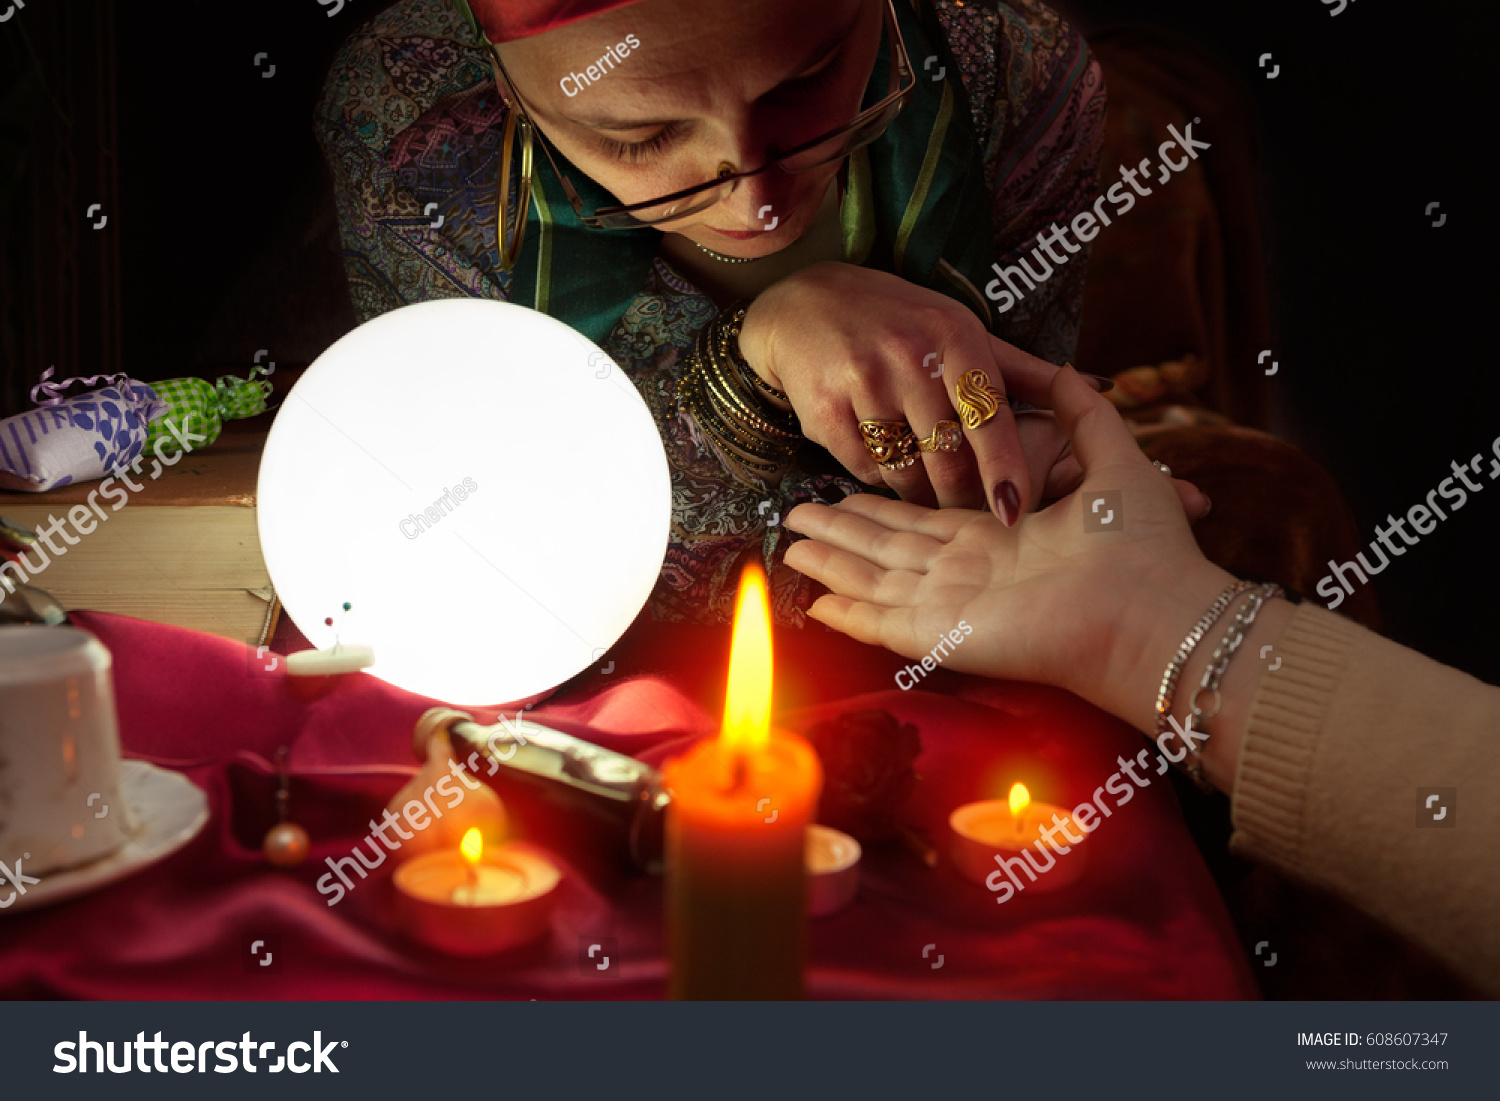 Old fortune teller woman holding another woman hand for palm reading #608607347